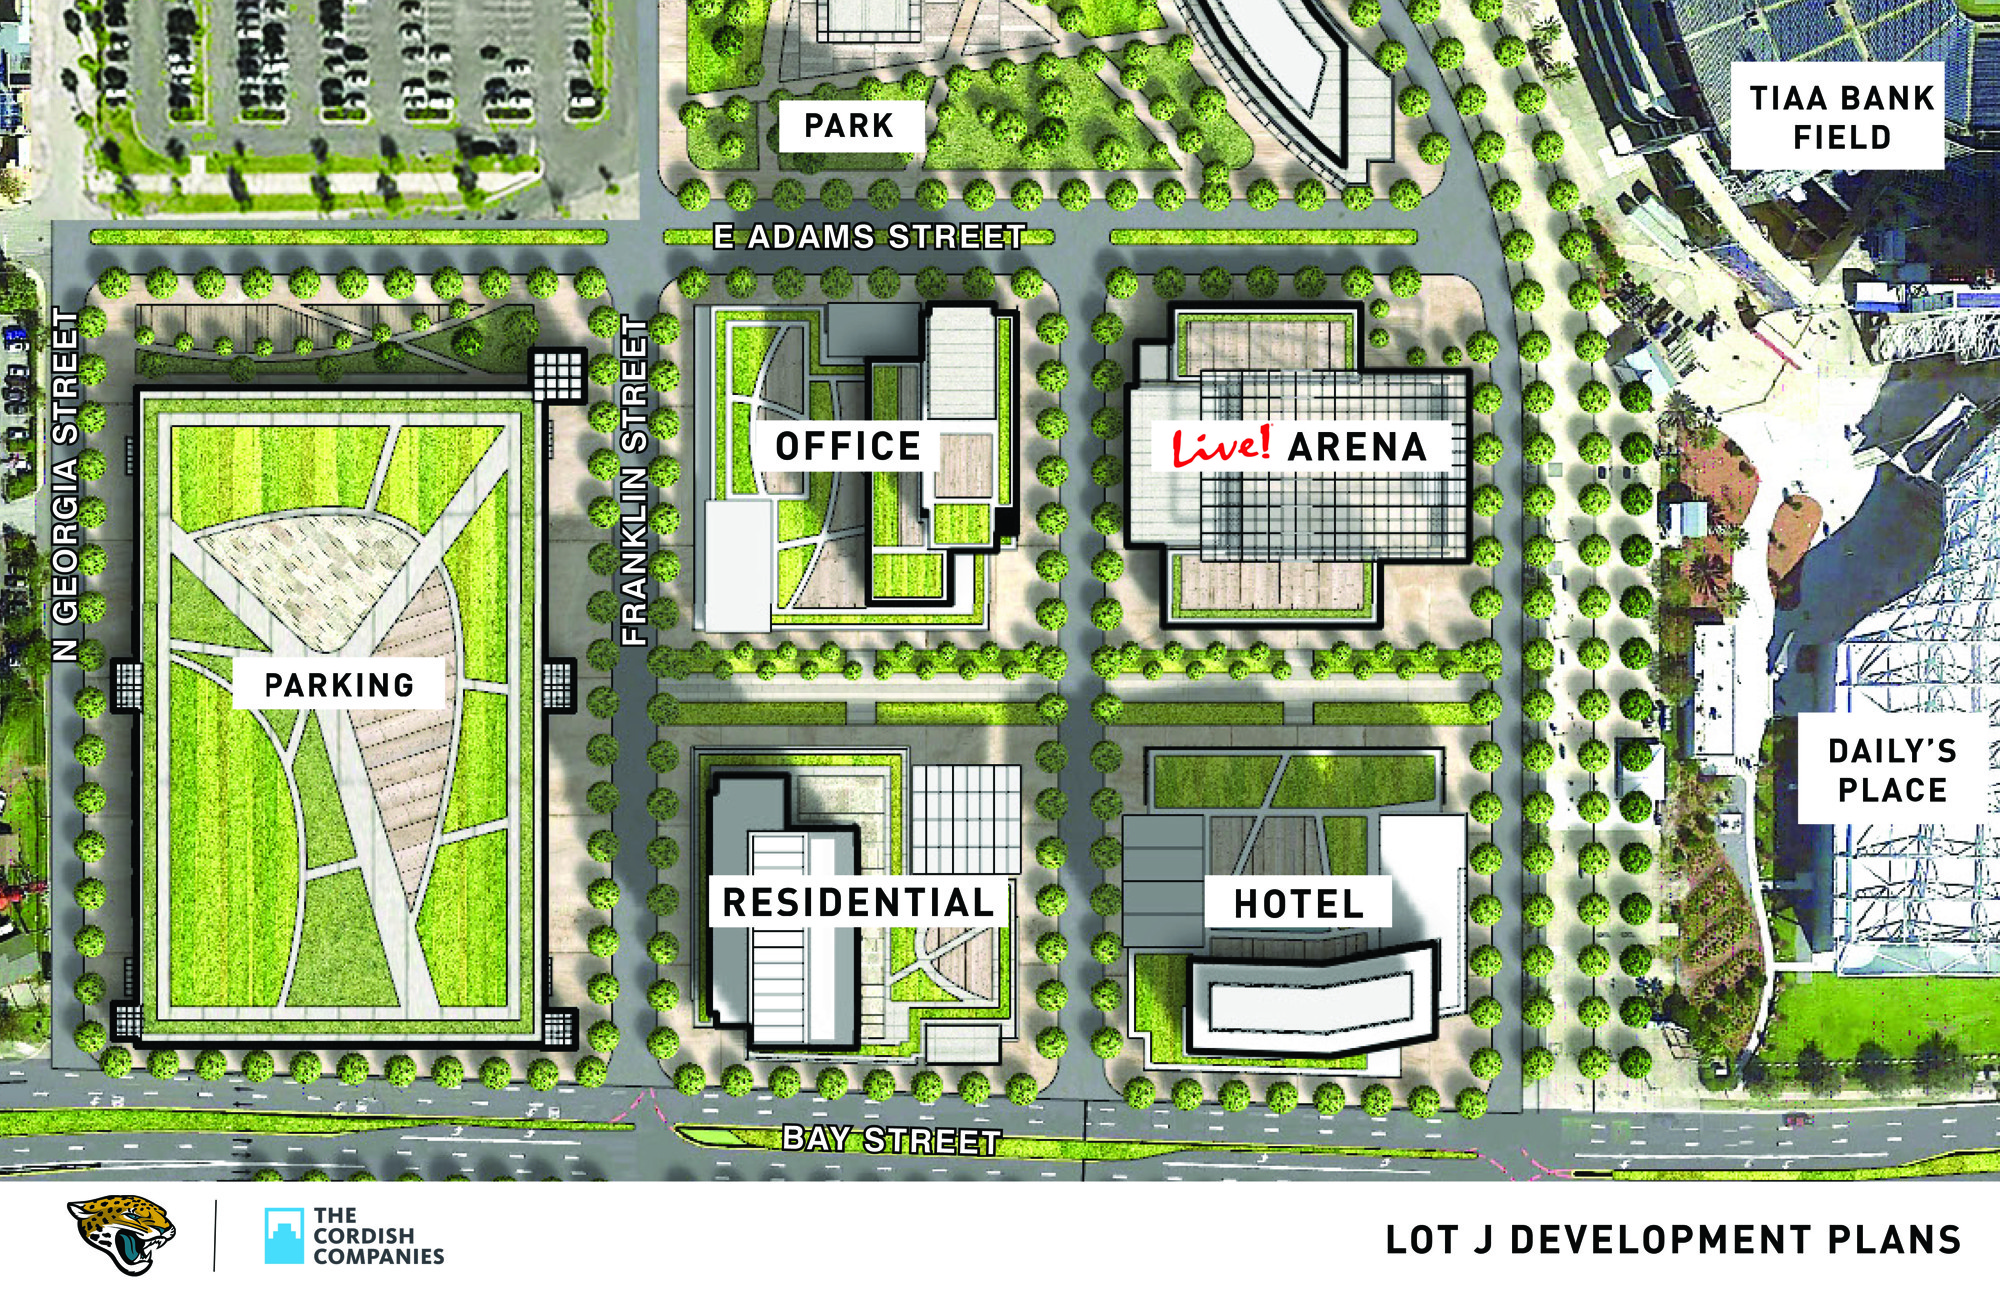 The Jaguars showed this site plan for the Lot J development at the State of the Franchise presentation.